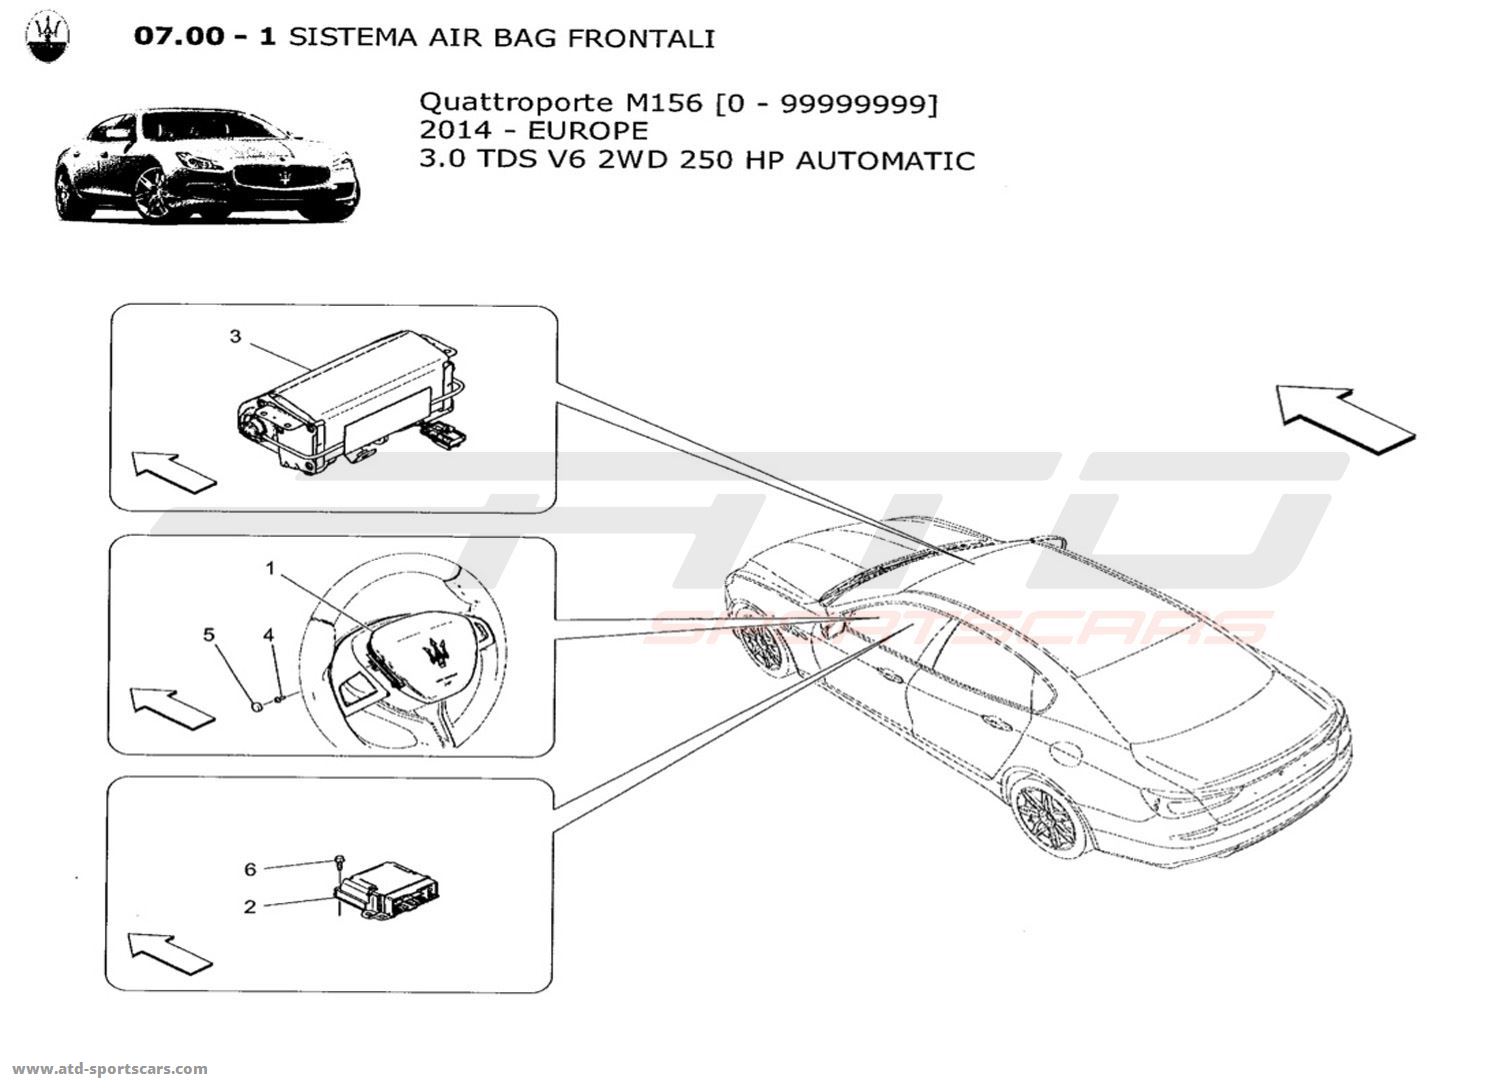 FRONT AIRBAG SYSTEM